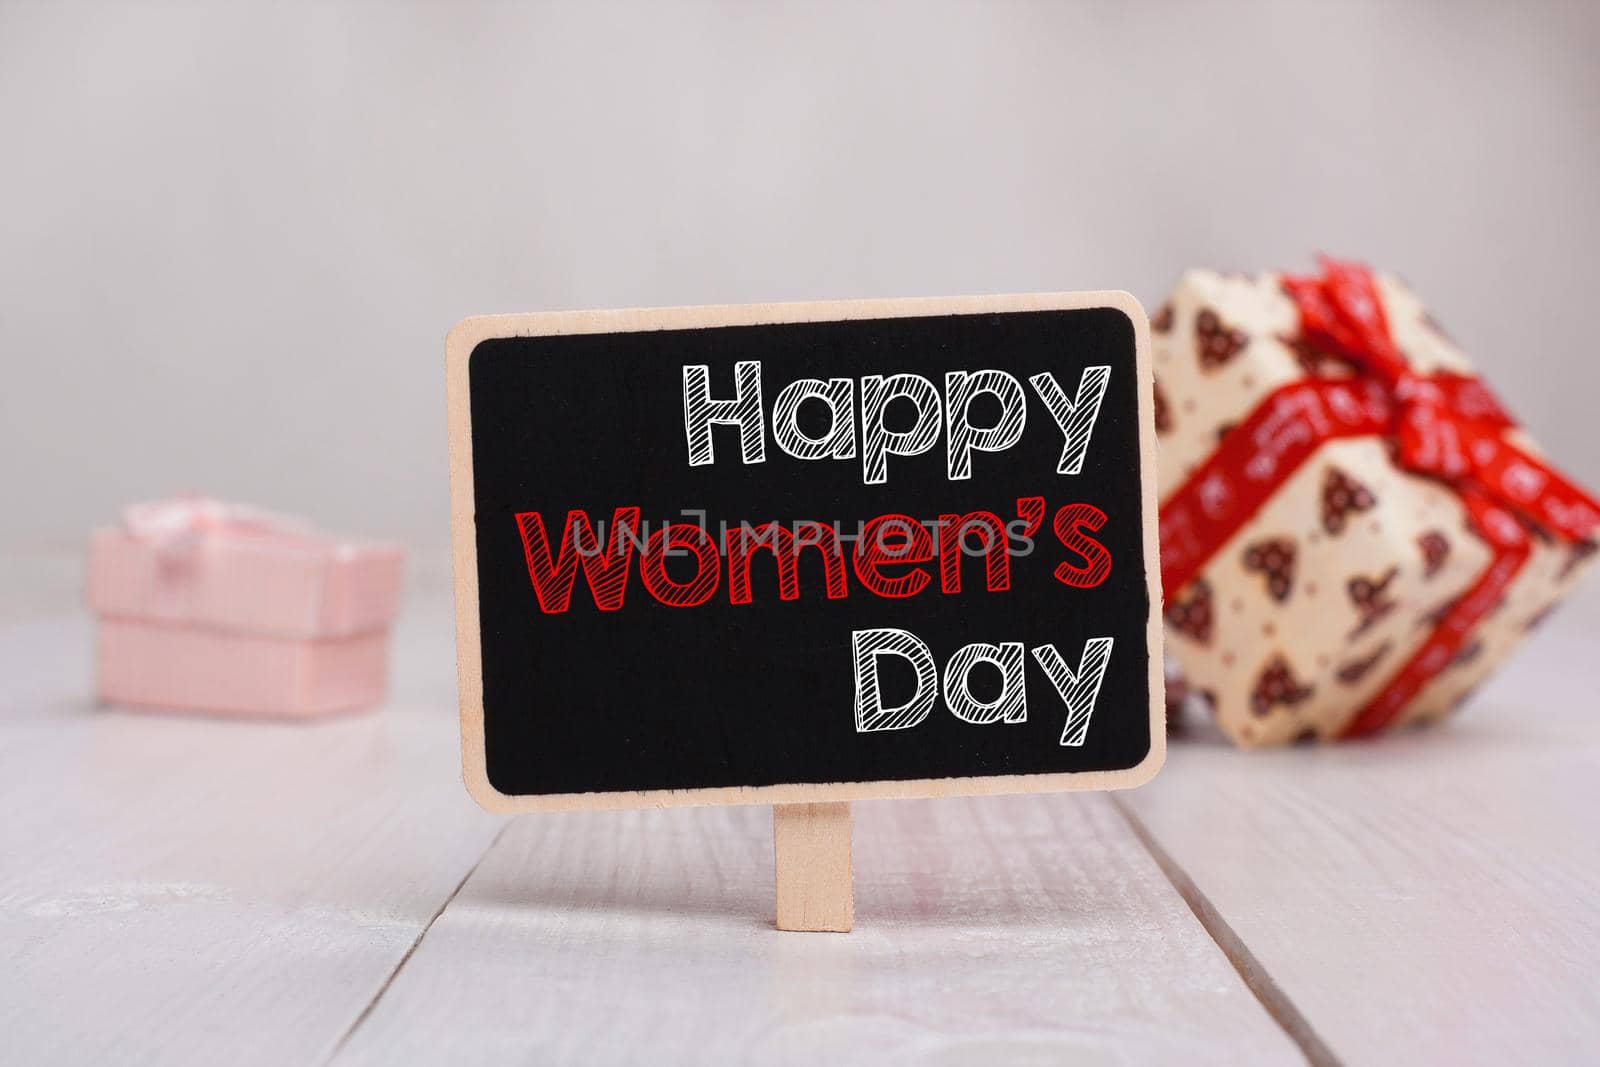 Happy Woman's Day message written on little chalkboar. Background with gifts.